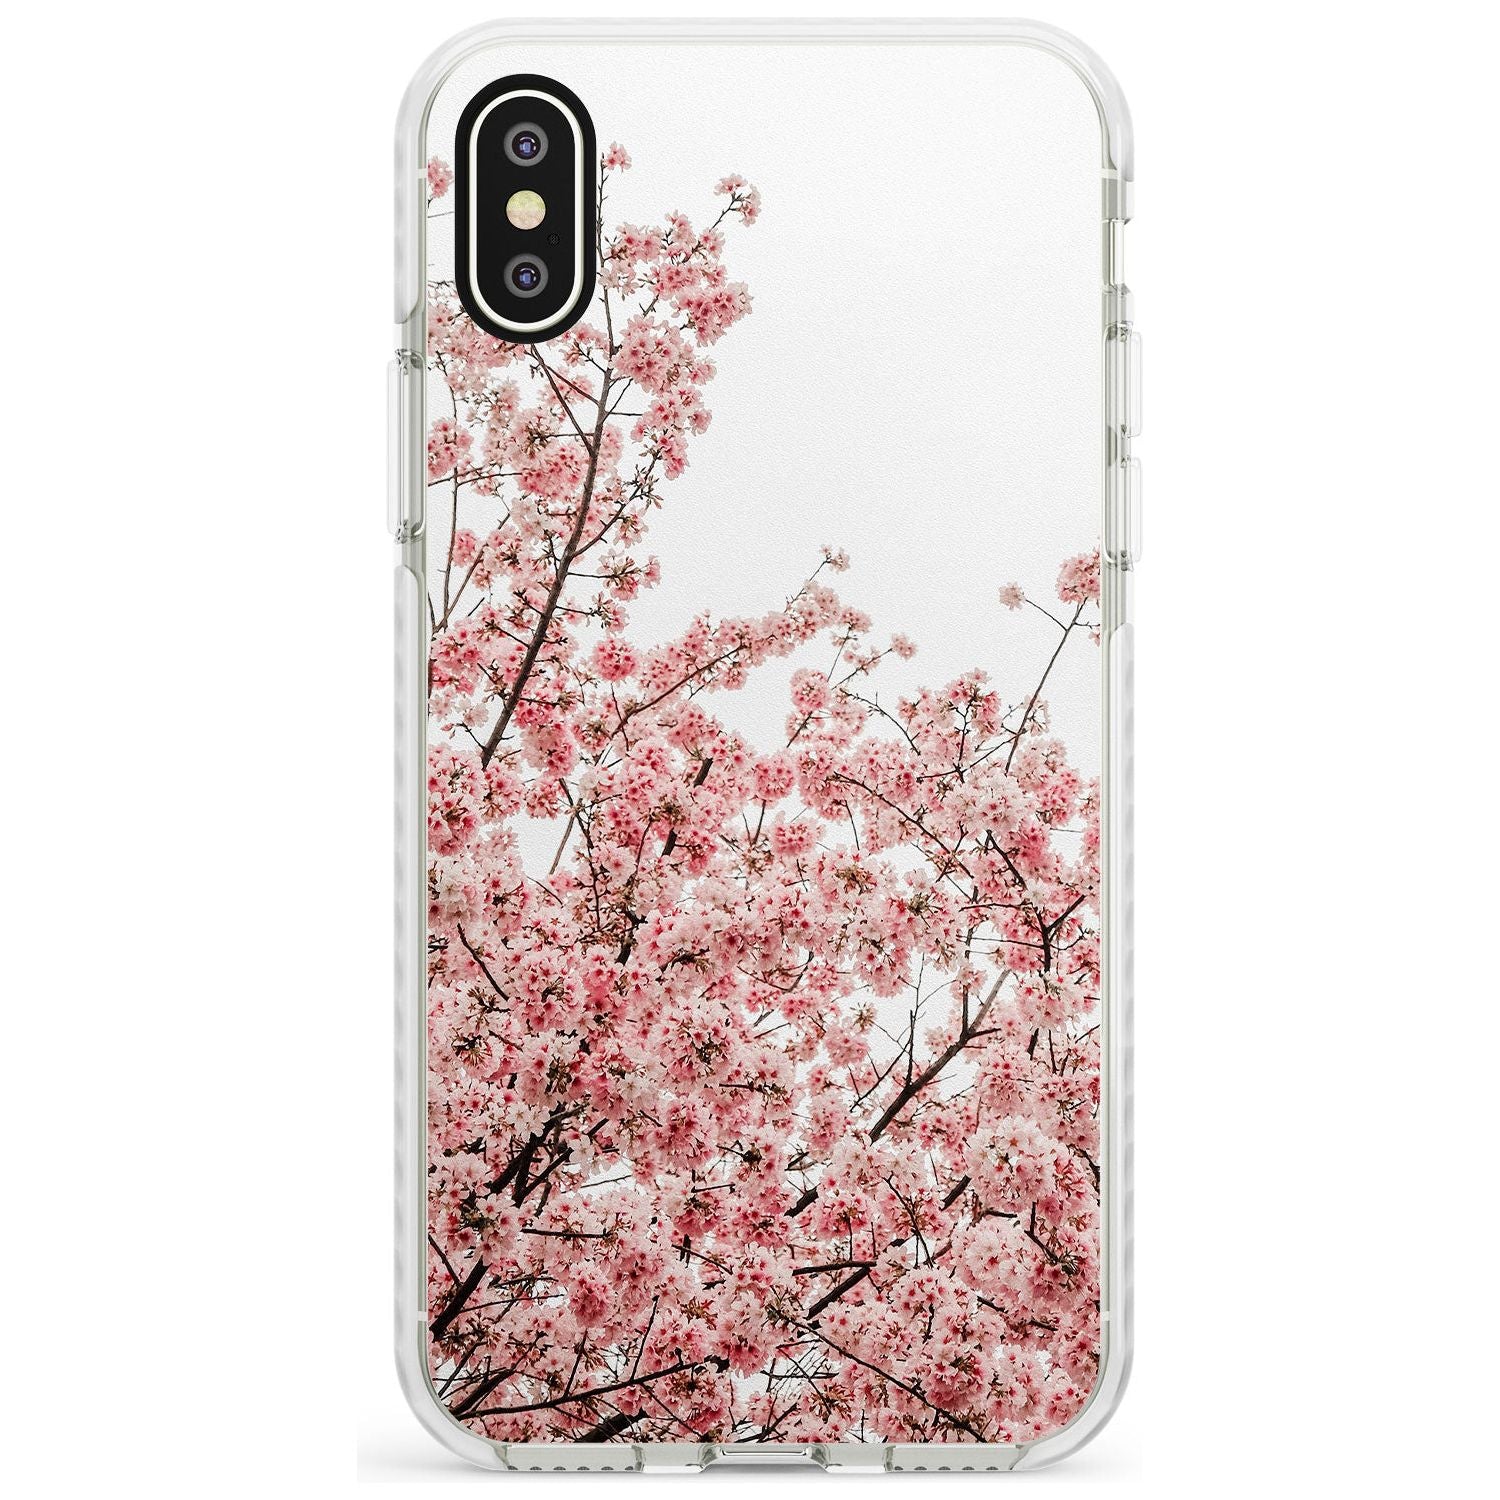 Cherry Blossoms - Real Floral Photographs Impact Phone Case for iPhone X XS Max XR